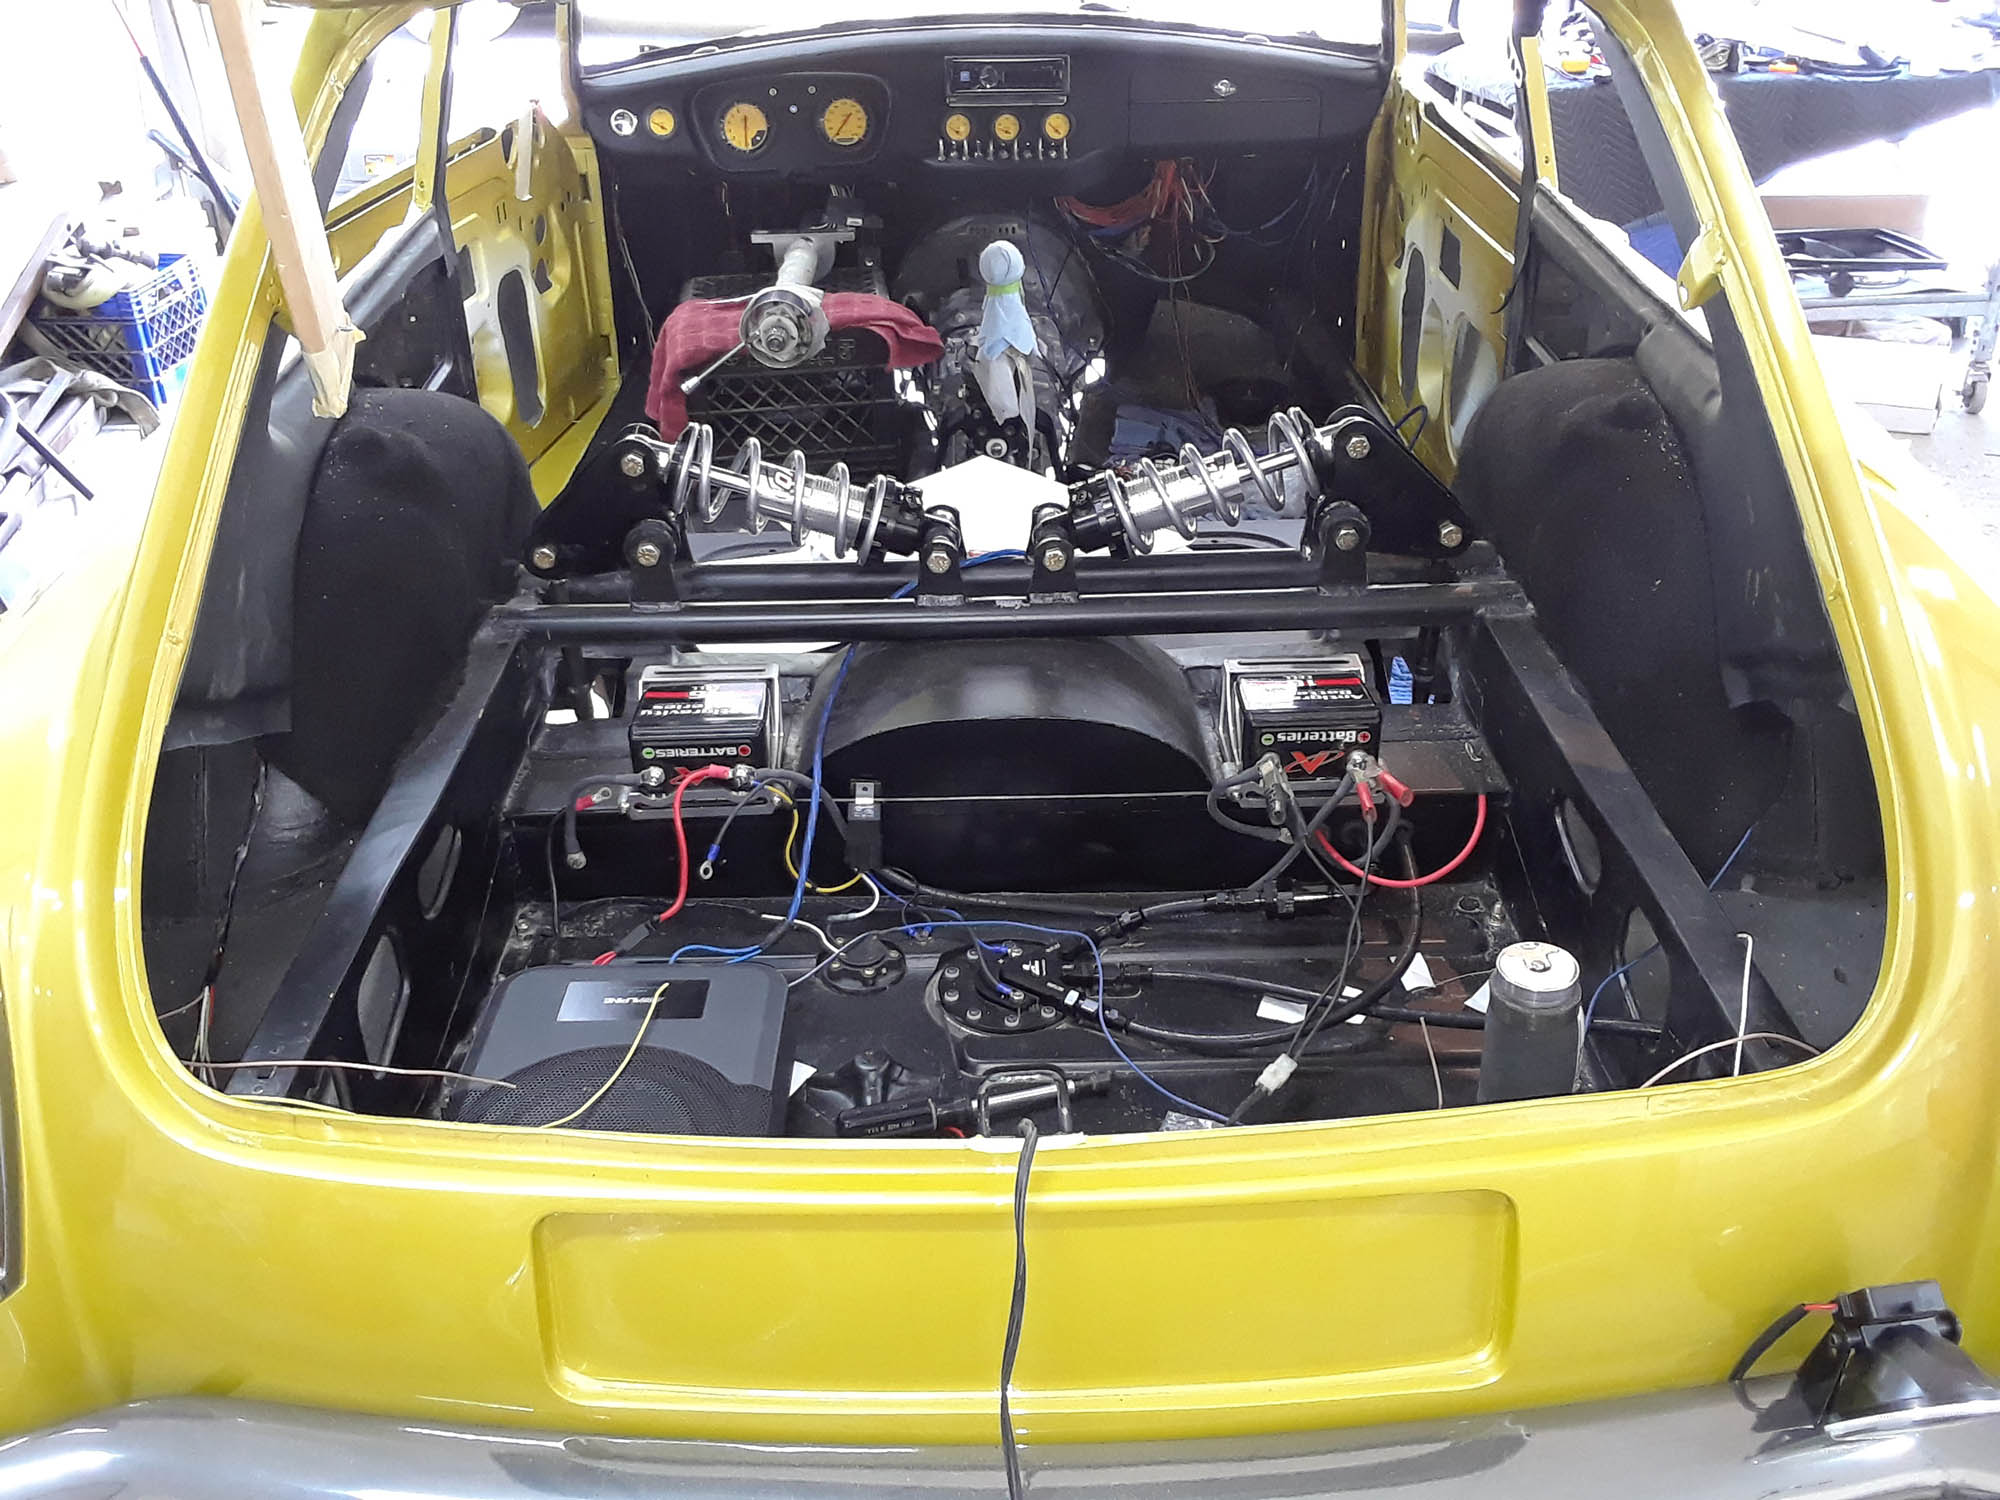 Joe Holyfield’s Build Photos of his 1974 MGB GT with a ... can am wiring harness 